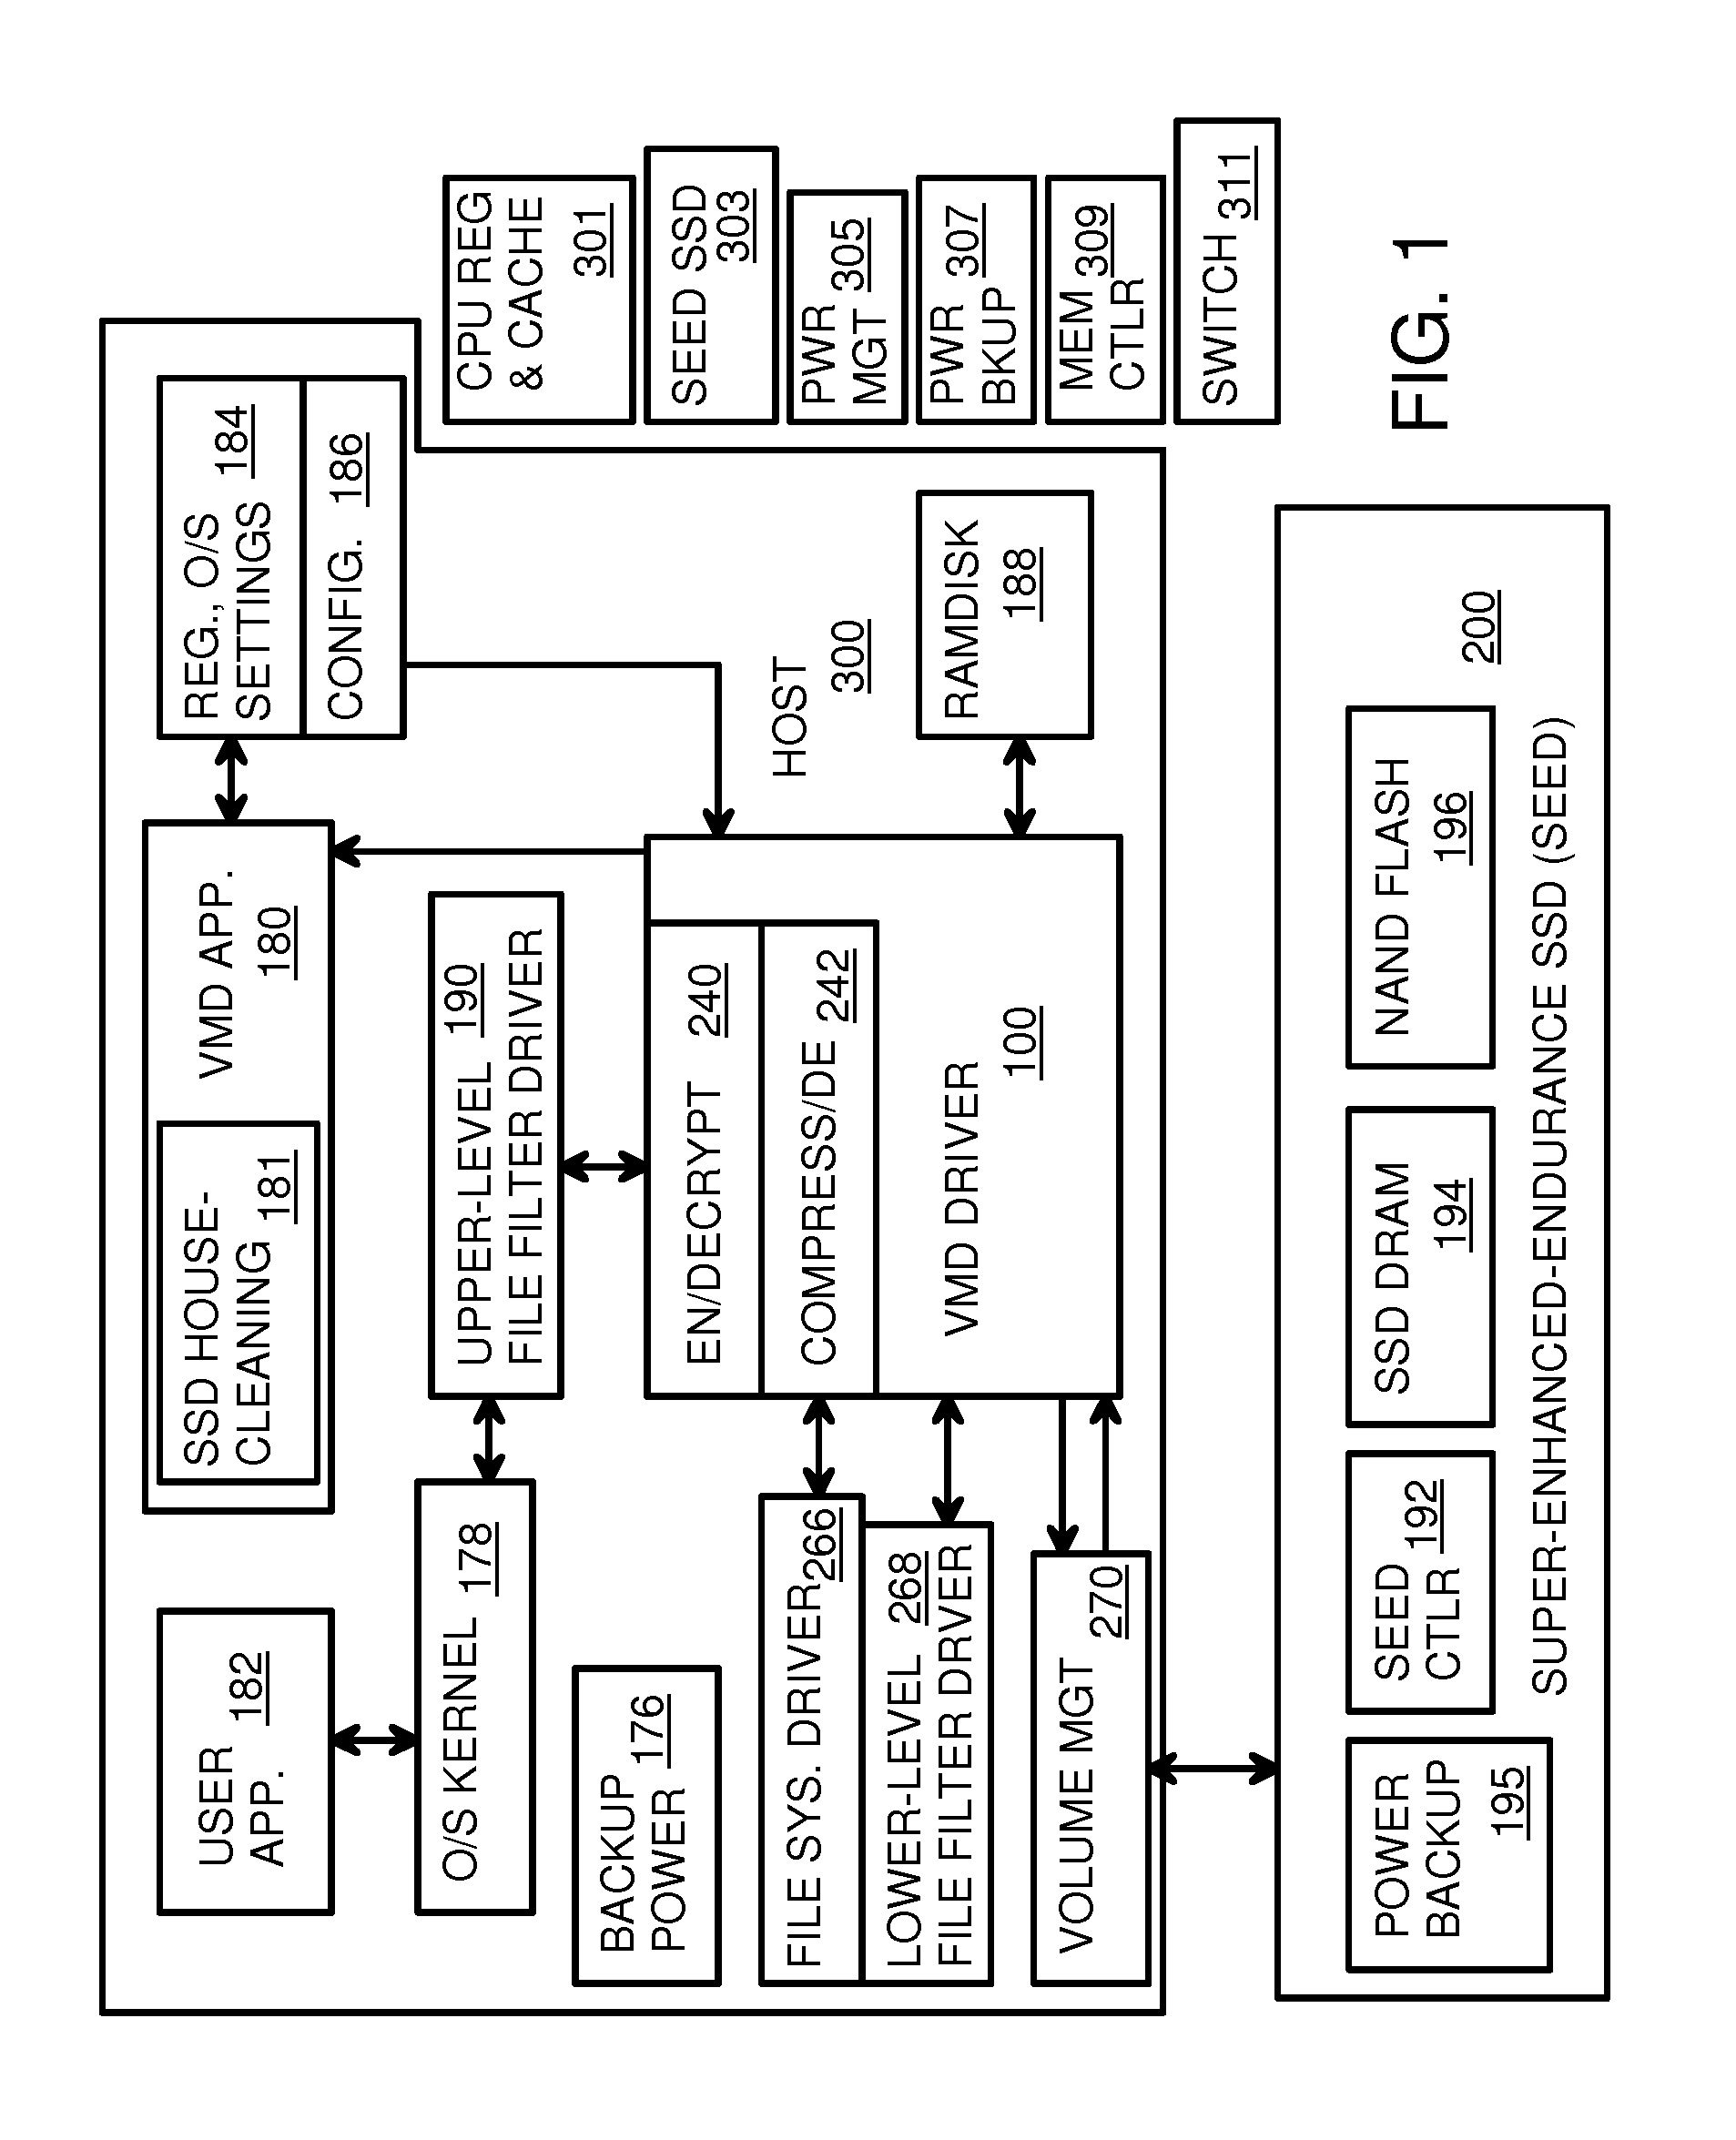 Virtual Memory Device (VMD) Application/Driver with Dual-Level Interception for Data-Type Splitting, Meta-Page Grouping, and Diversion of Temp Files to Ramdisks for Enhanced Flash Endurance